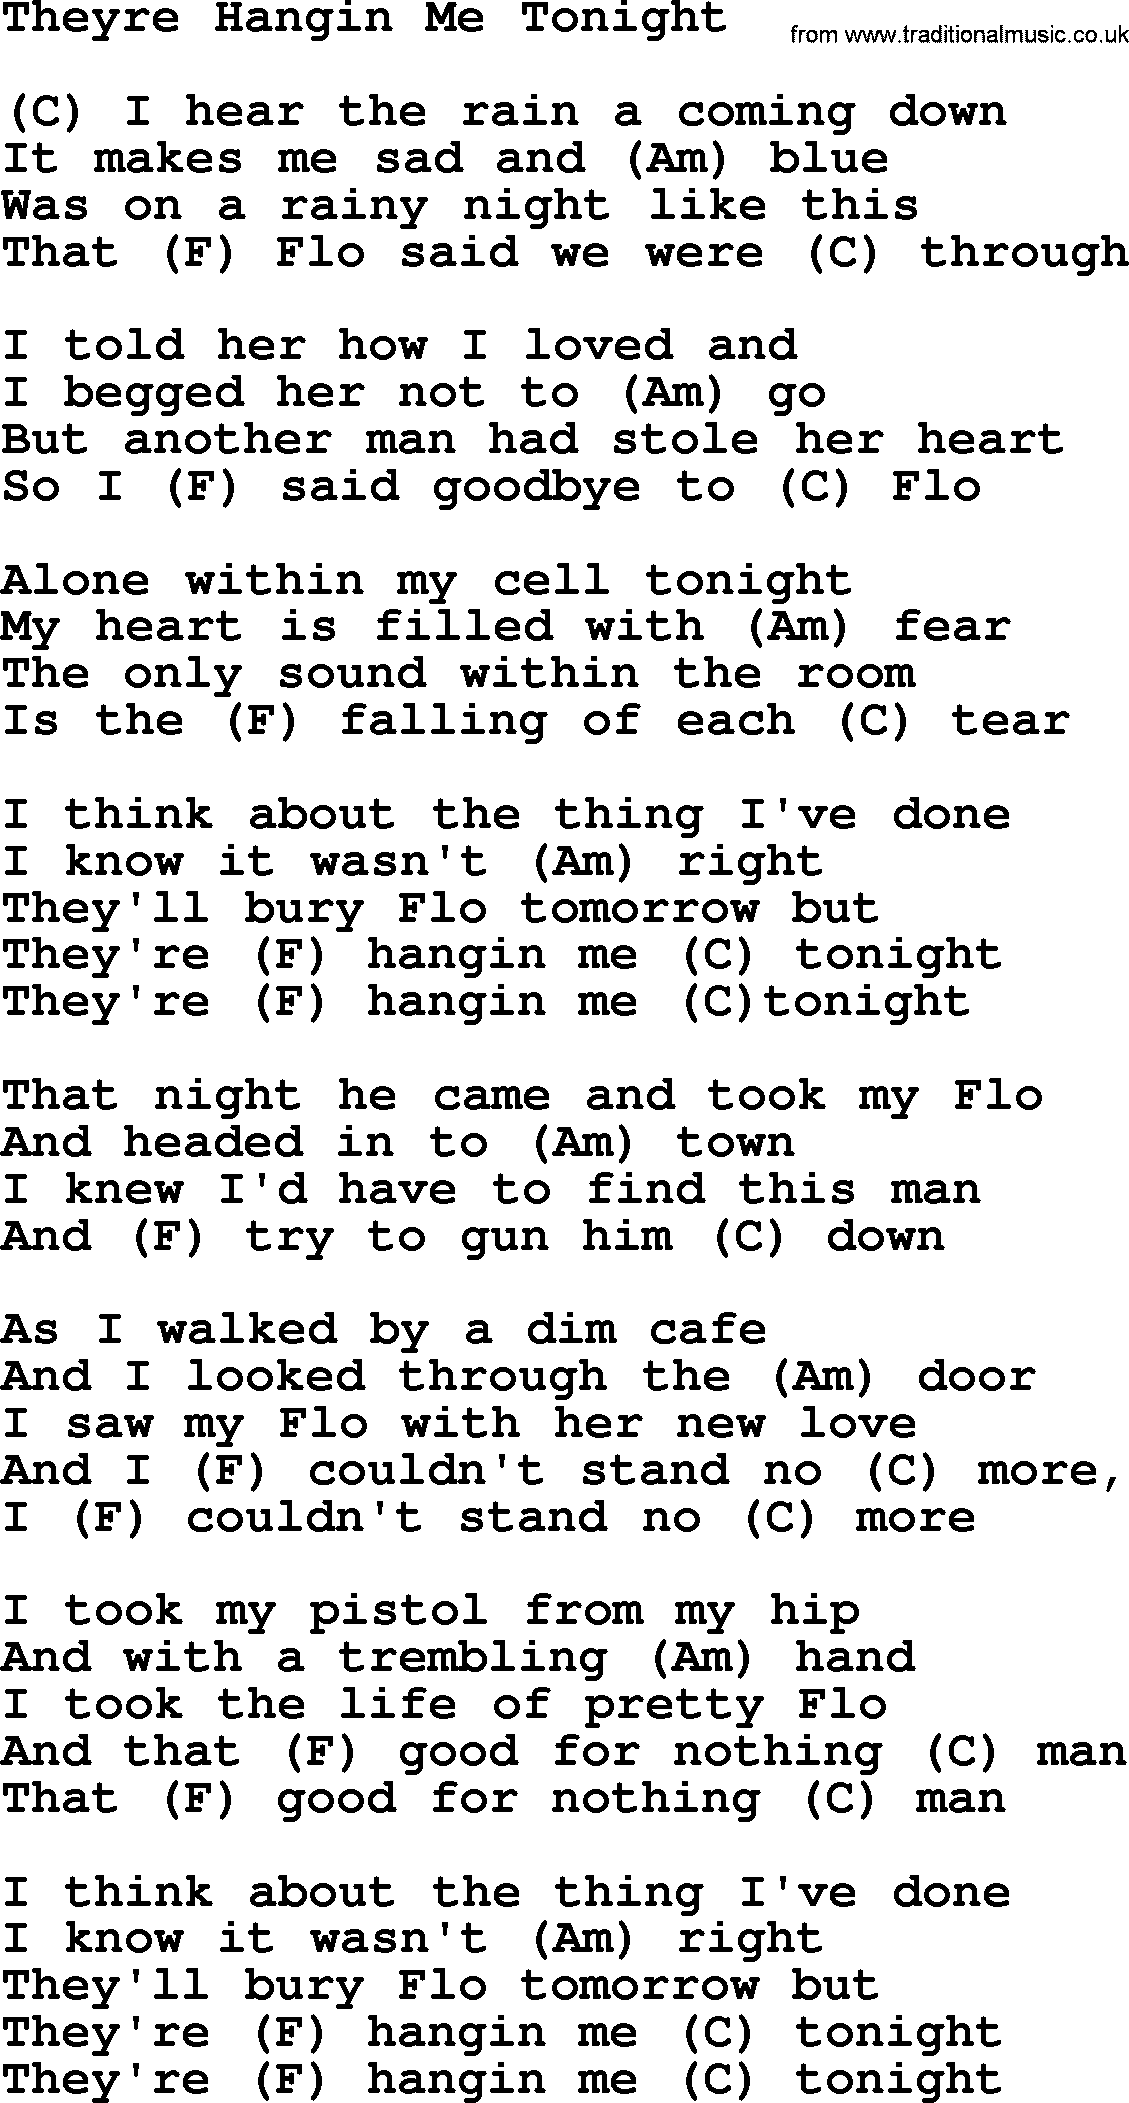 Marty Robbins song: Theyre Hangin Me Tonight, lyrics and chords